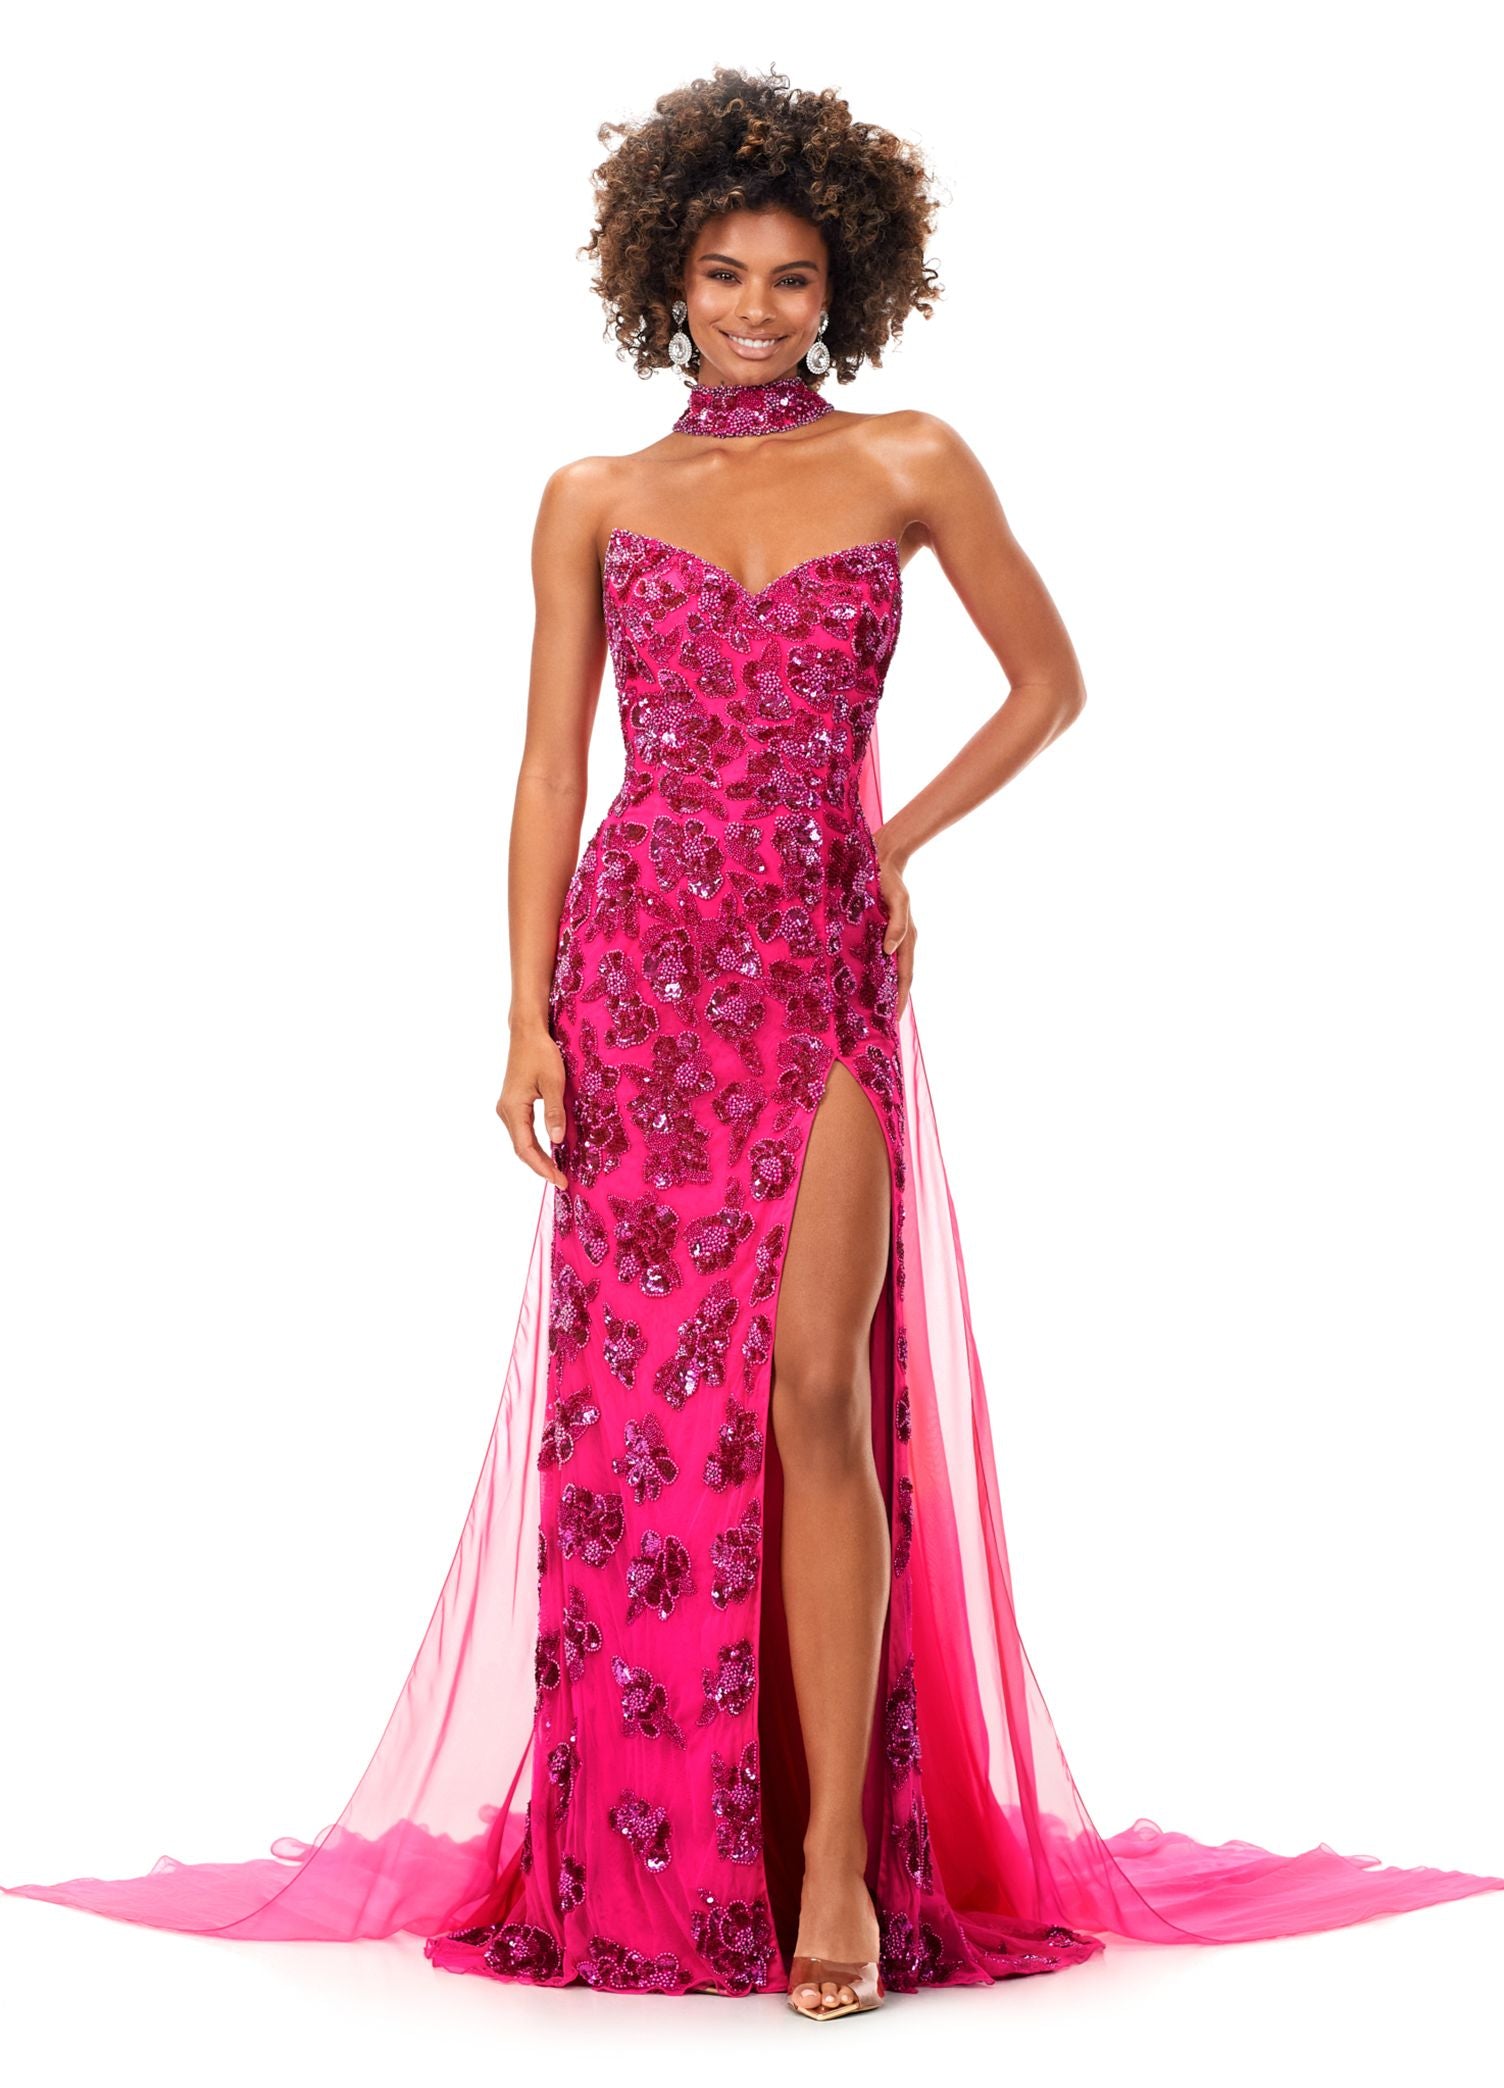 Ashley Lauren 11351 All we can say is WOW! This strapless beaded gown with crystal detailing is sure to make a statement at your next event. The gown features a gorgeous beaded neck choker with attached chiffon cape. Strapless Gown Beaded Choker Chiffon Cape Left Leg Slit COLORS: Royal, Ivory, Red, Neon Pink